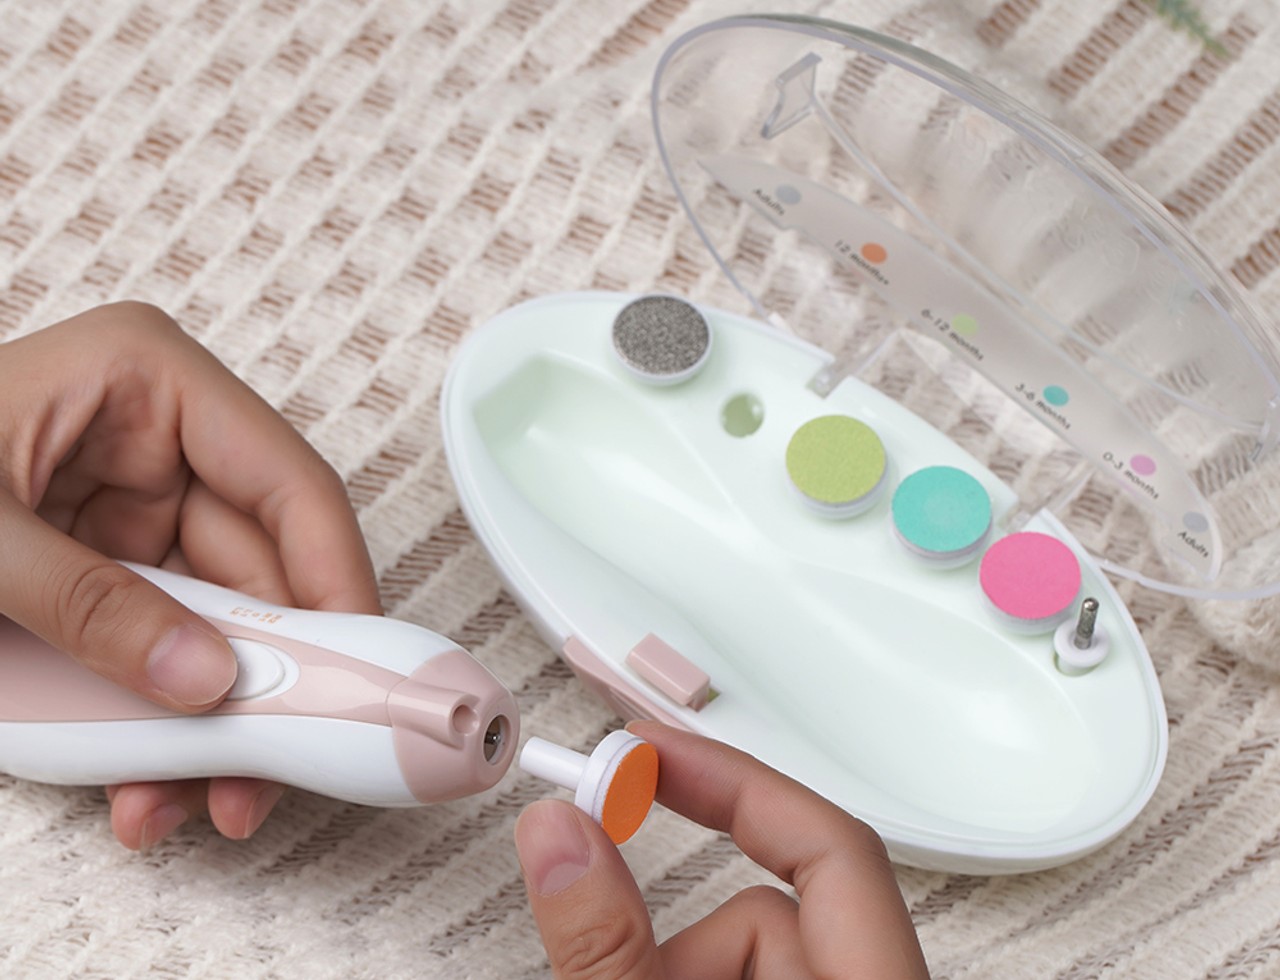 Baby Nail File Review: The Best Tool for Gentle Nail Care